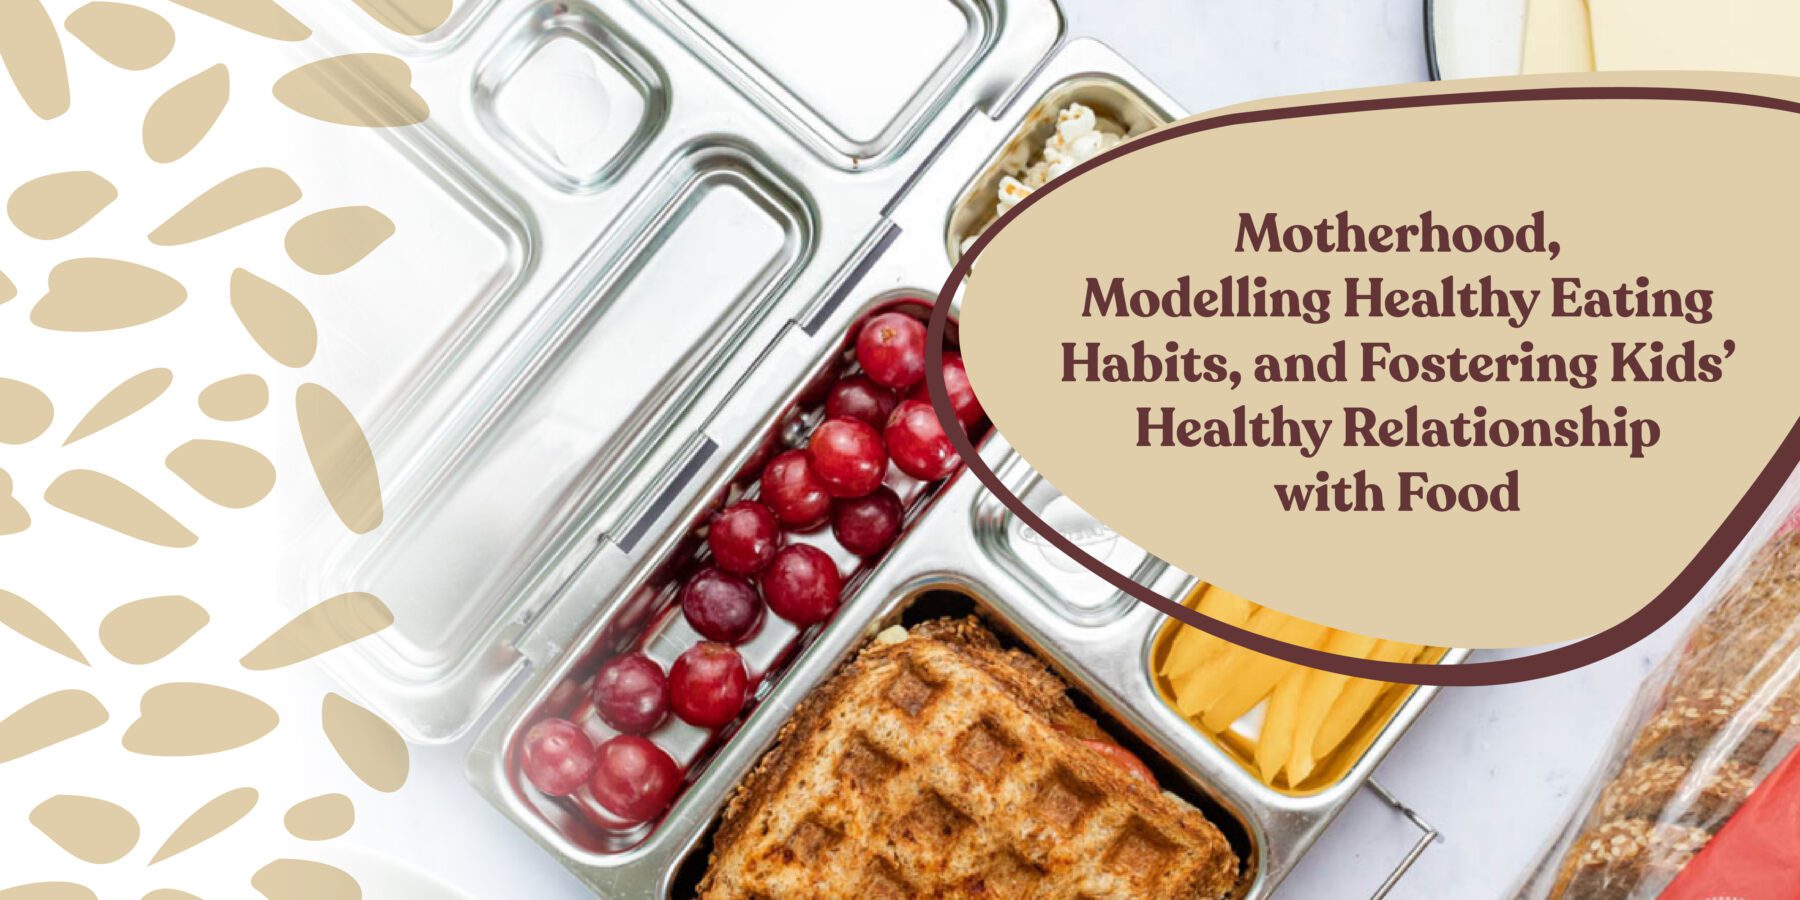 Motherhood, Modelling Healthy Eating Habits, and Fostering Kids’ Healthy Relationship with Food